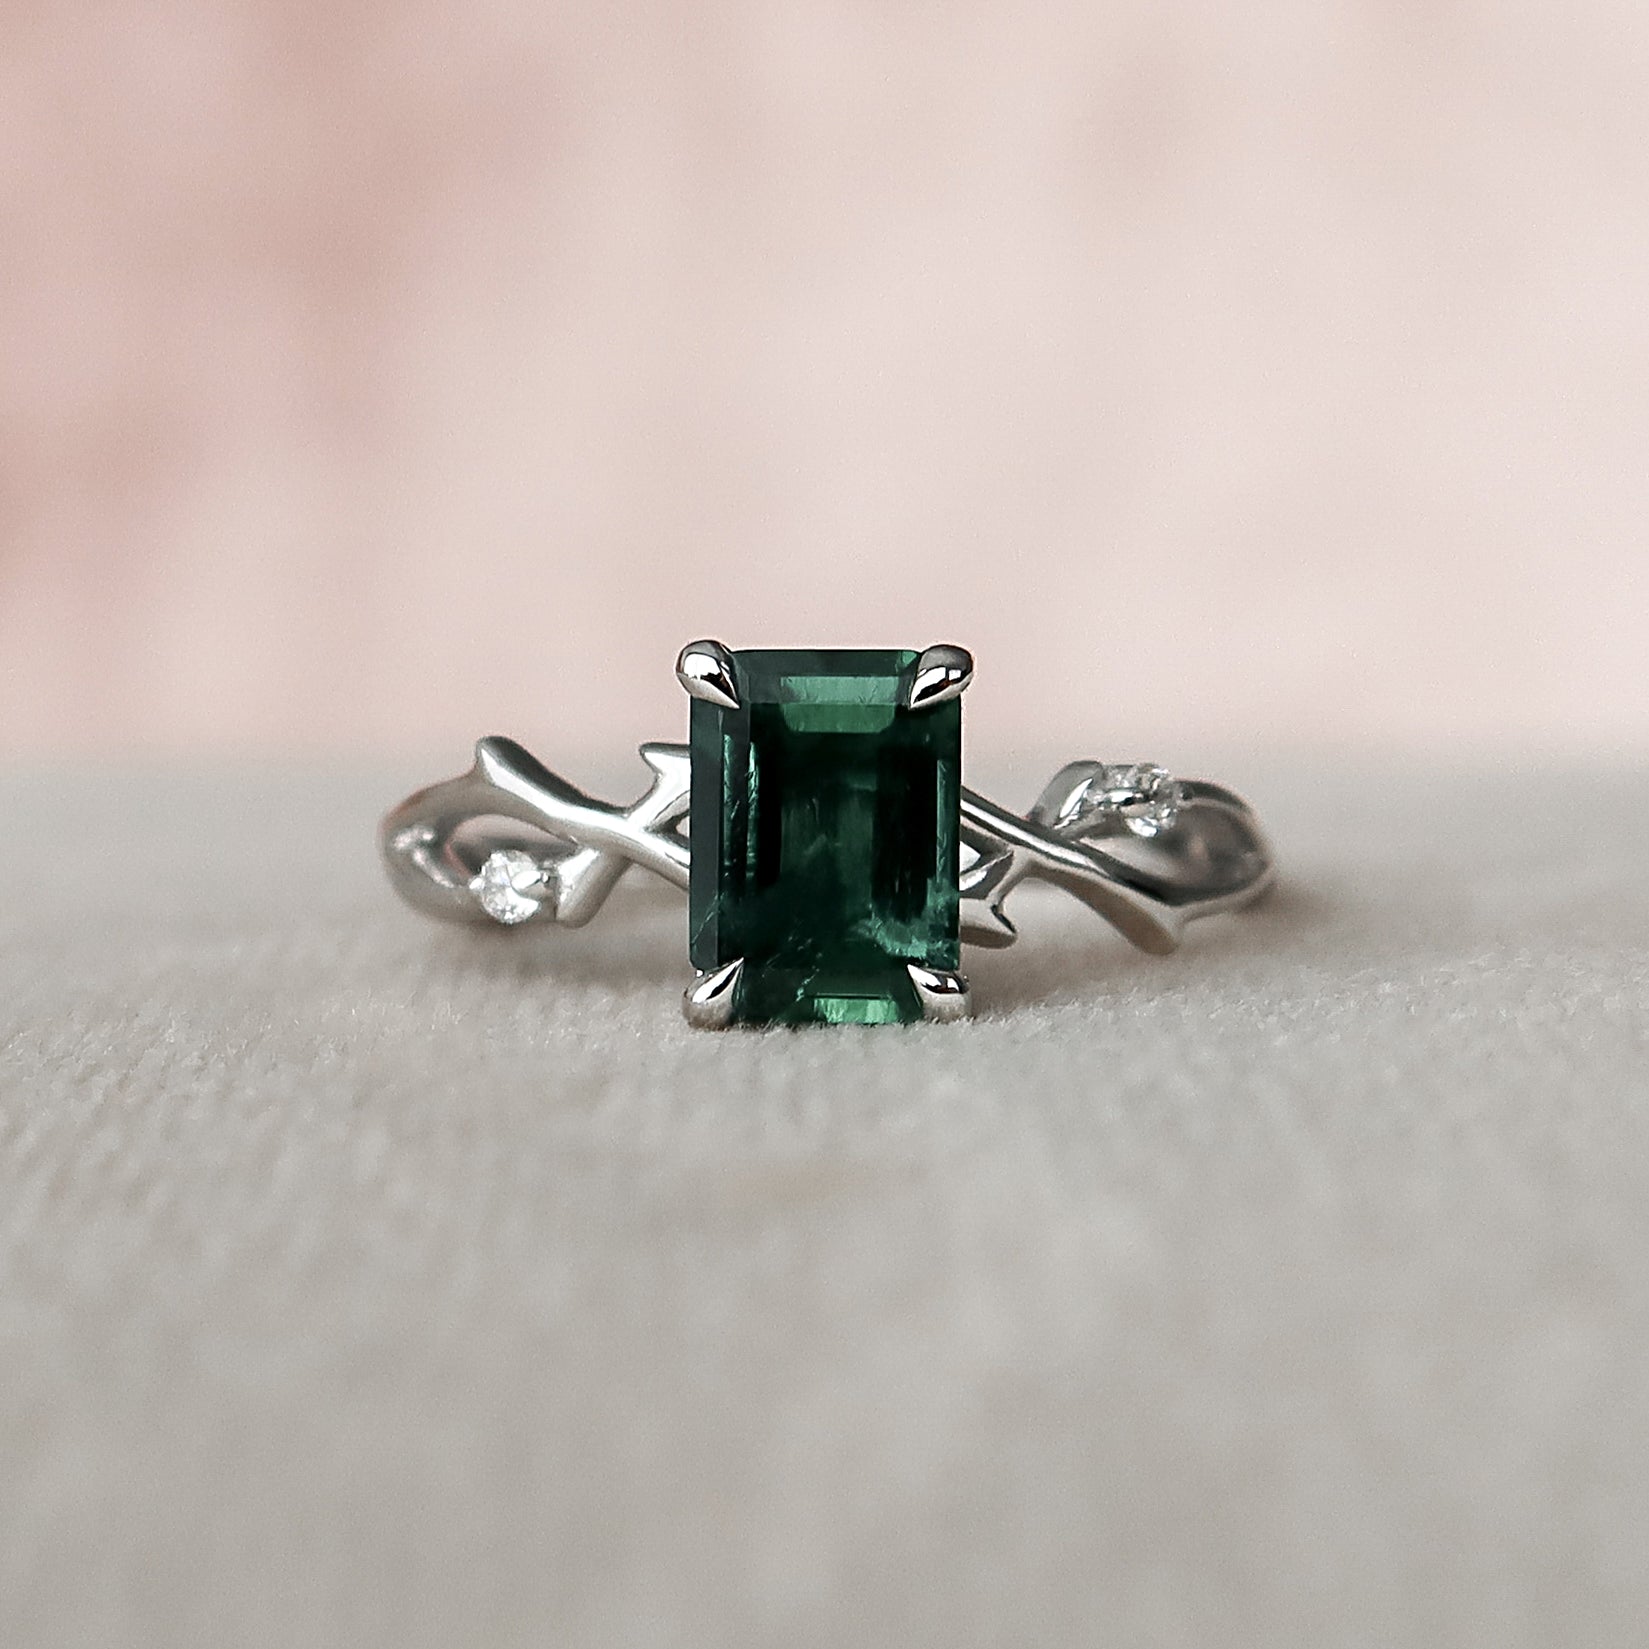 Shop Engagement Rings (Preset or Make Your Own Ring) | GemsNY